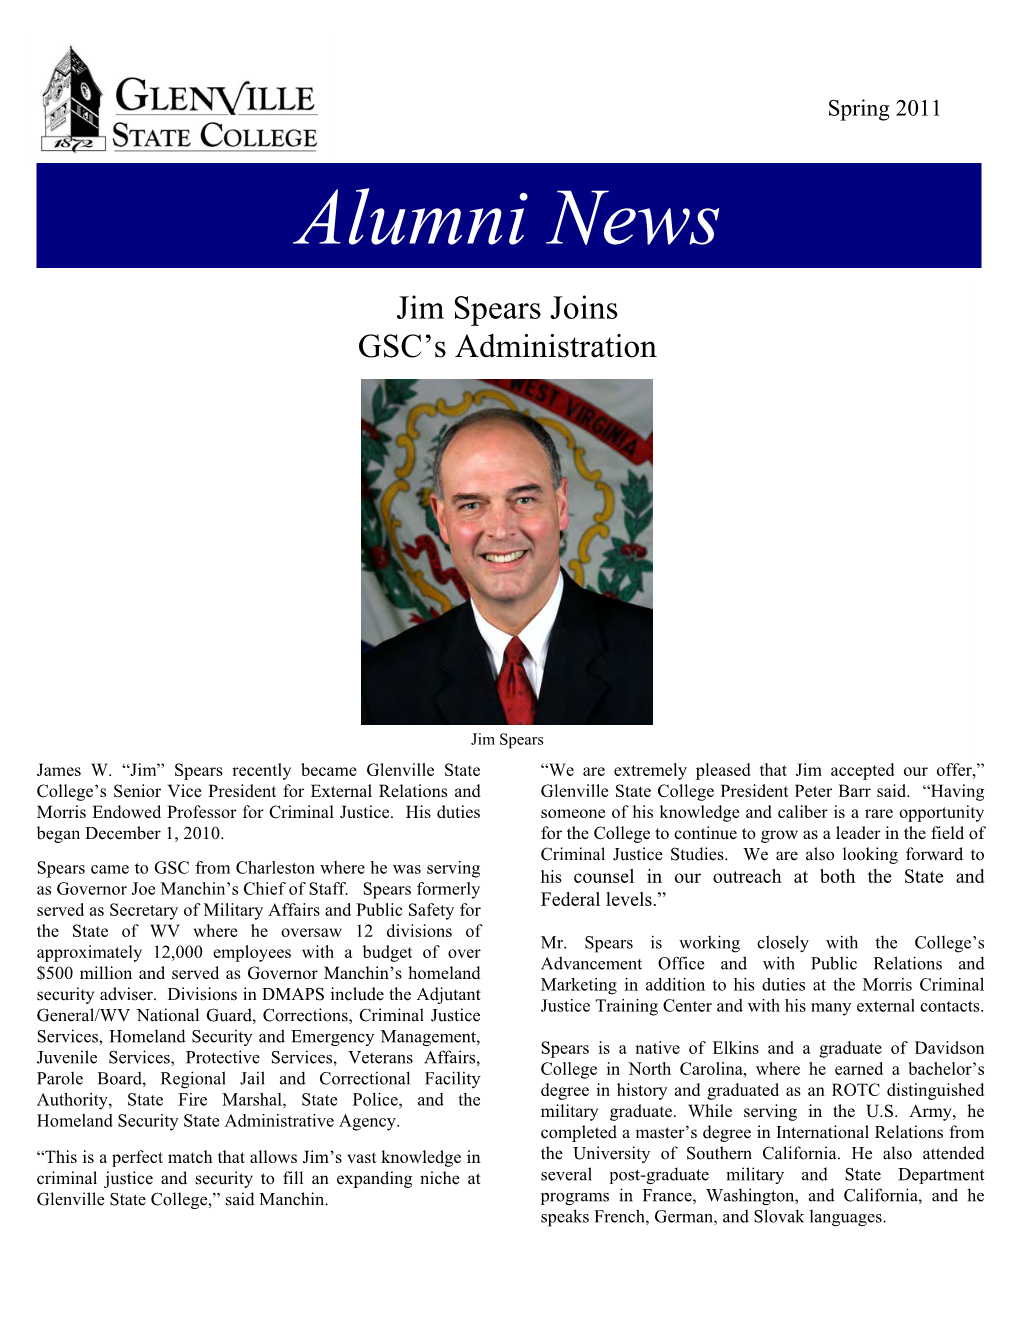 Jim Spears Joins GSC's Administration